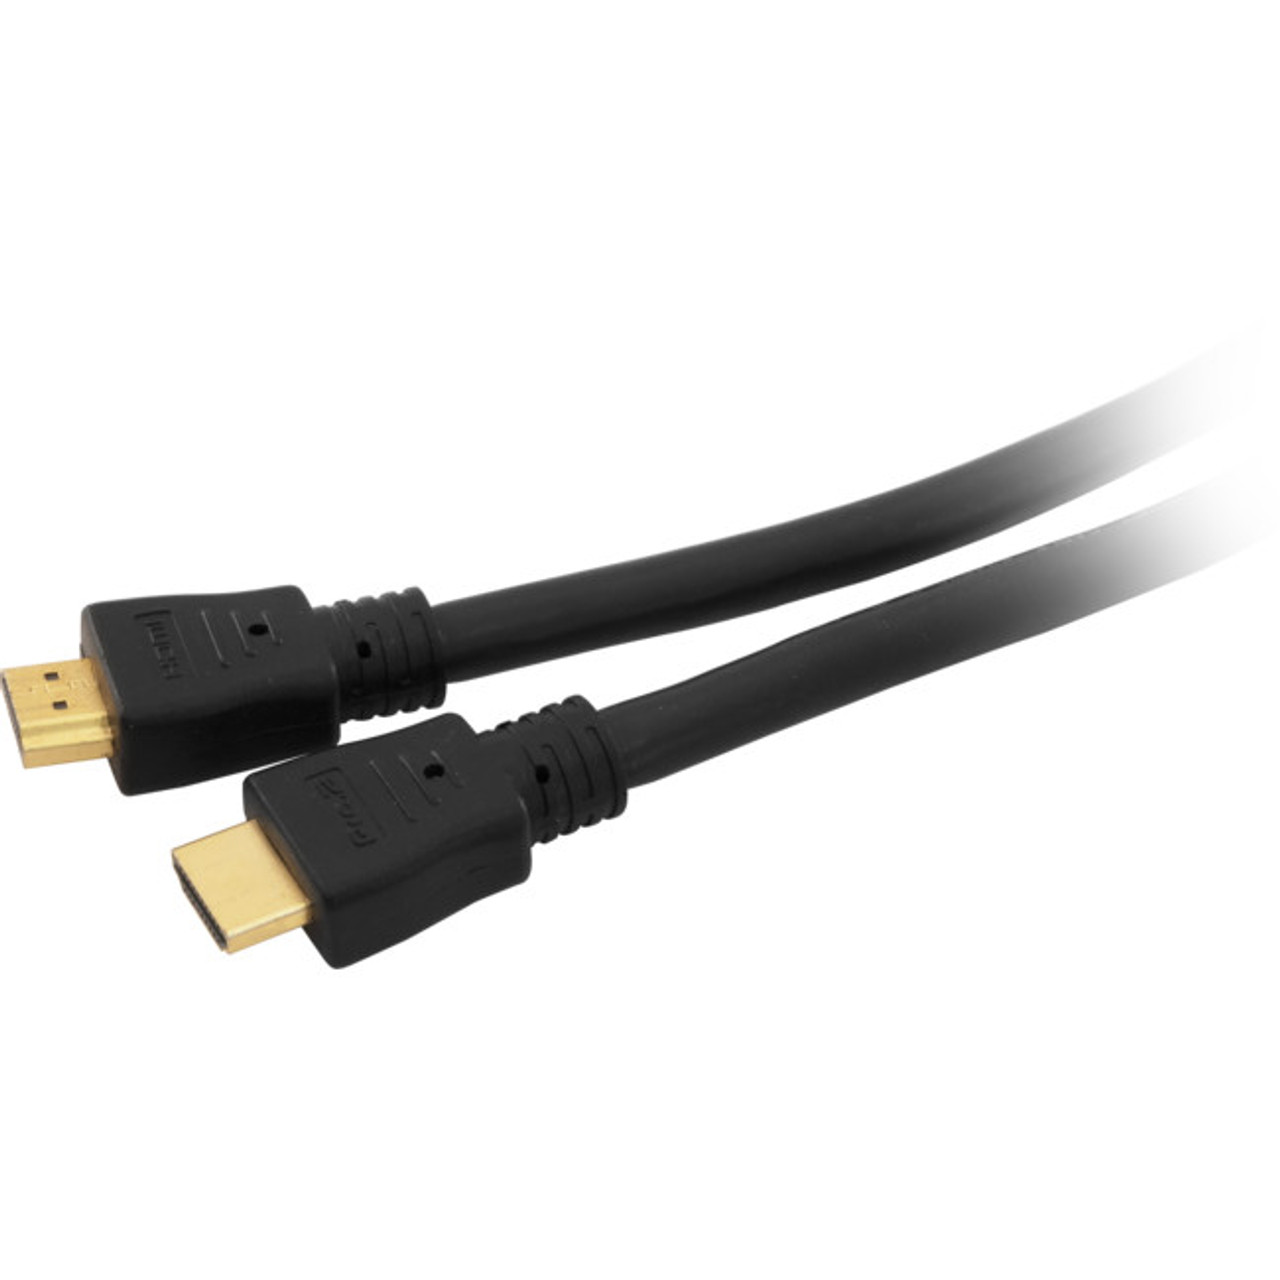 Pro.2 Contractor Series 4K 10.2Gbps HDMI Cables (10, 15, 20, 30m)